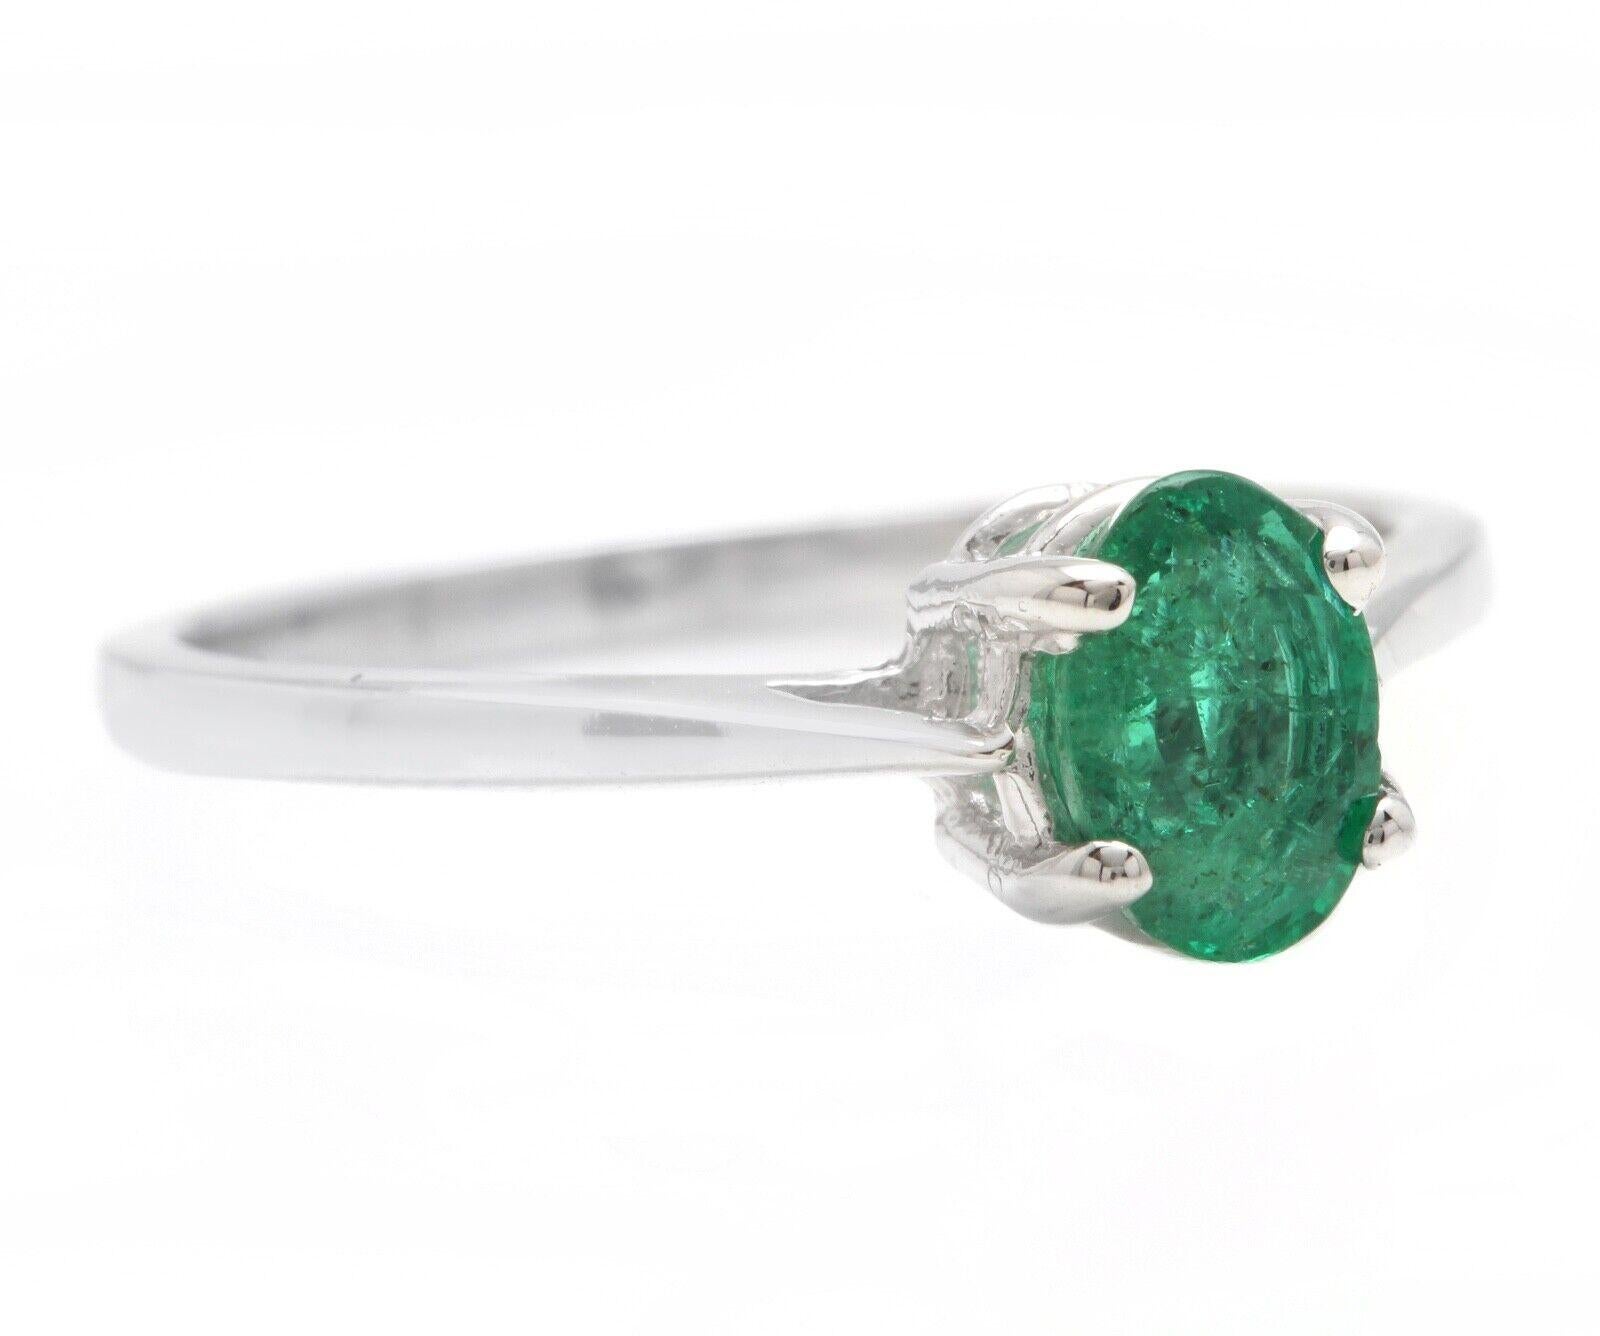 Exquisite Natural Emerald 14K Solid White Gold Ring

Total Natural Emerald Weight is: Approx. 0.50 Carats 

Emerald Measures: Approx. 6.00 x 4.00mm

Emerald Treatment: Oiling

Ring size: 4.75 

Ring total weight: 1.3 grams

Disclaimer: all weights,